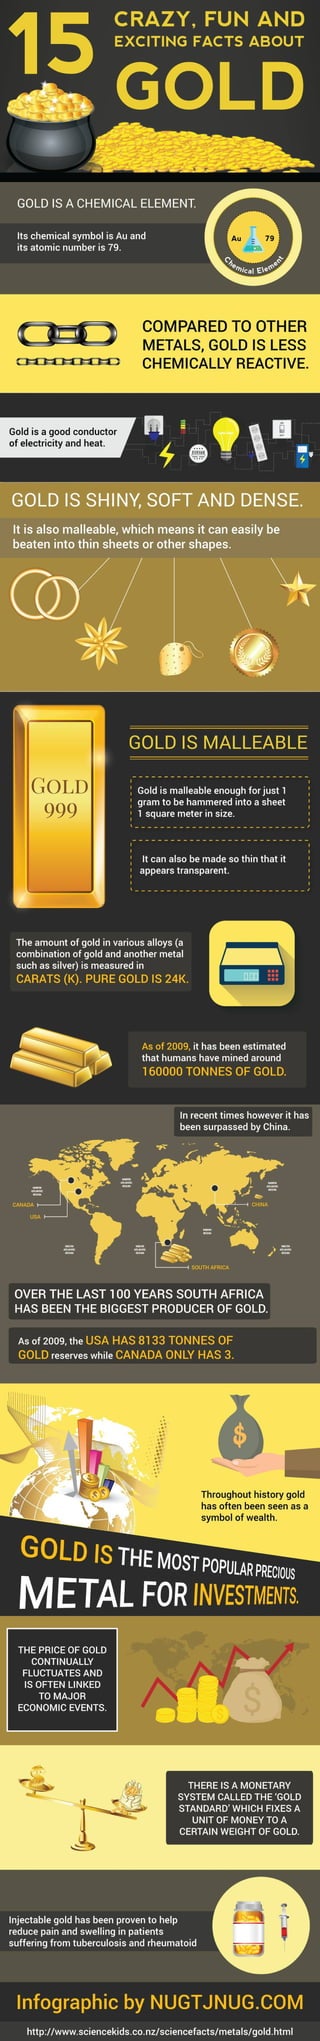 15 crazy facts about gold